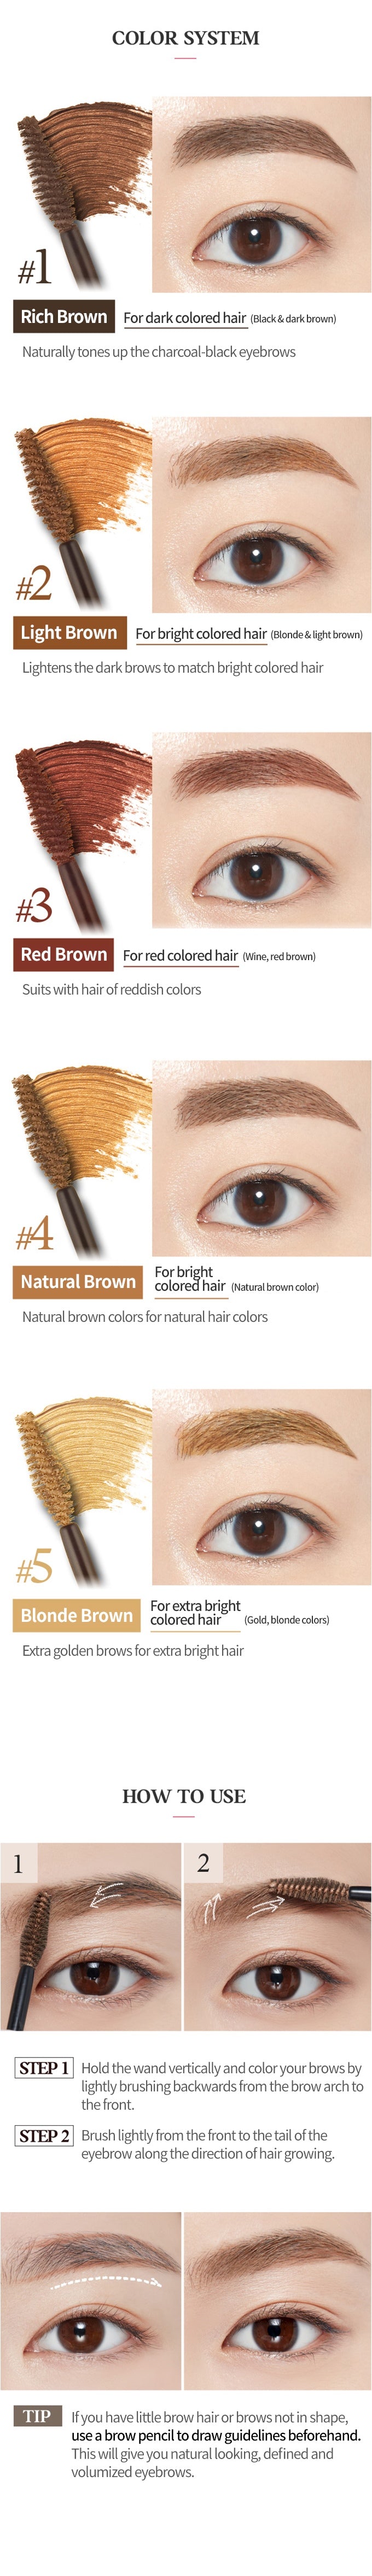 ETUDE HOUSE OH COLOR MY BROWS